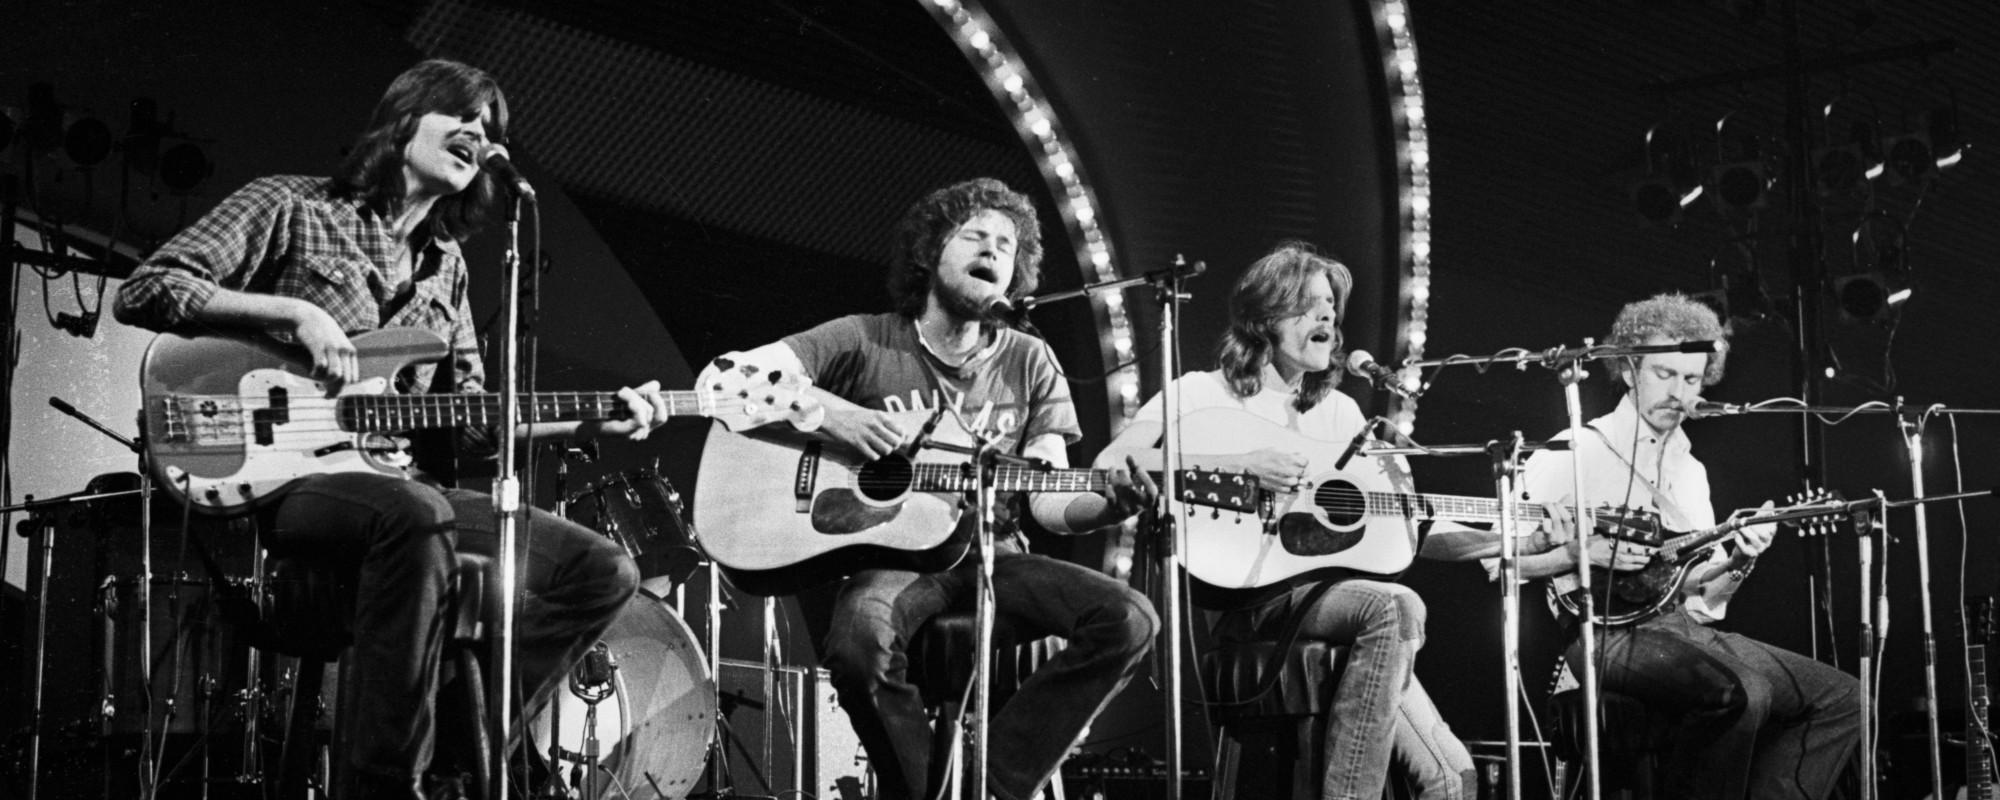 50 Years Later, Here Are the Top 5 Songs on Eagles' 'Desperado